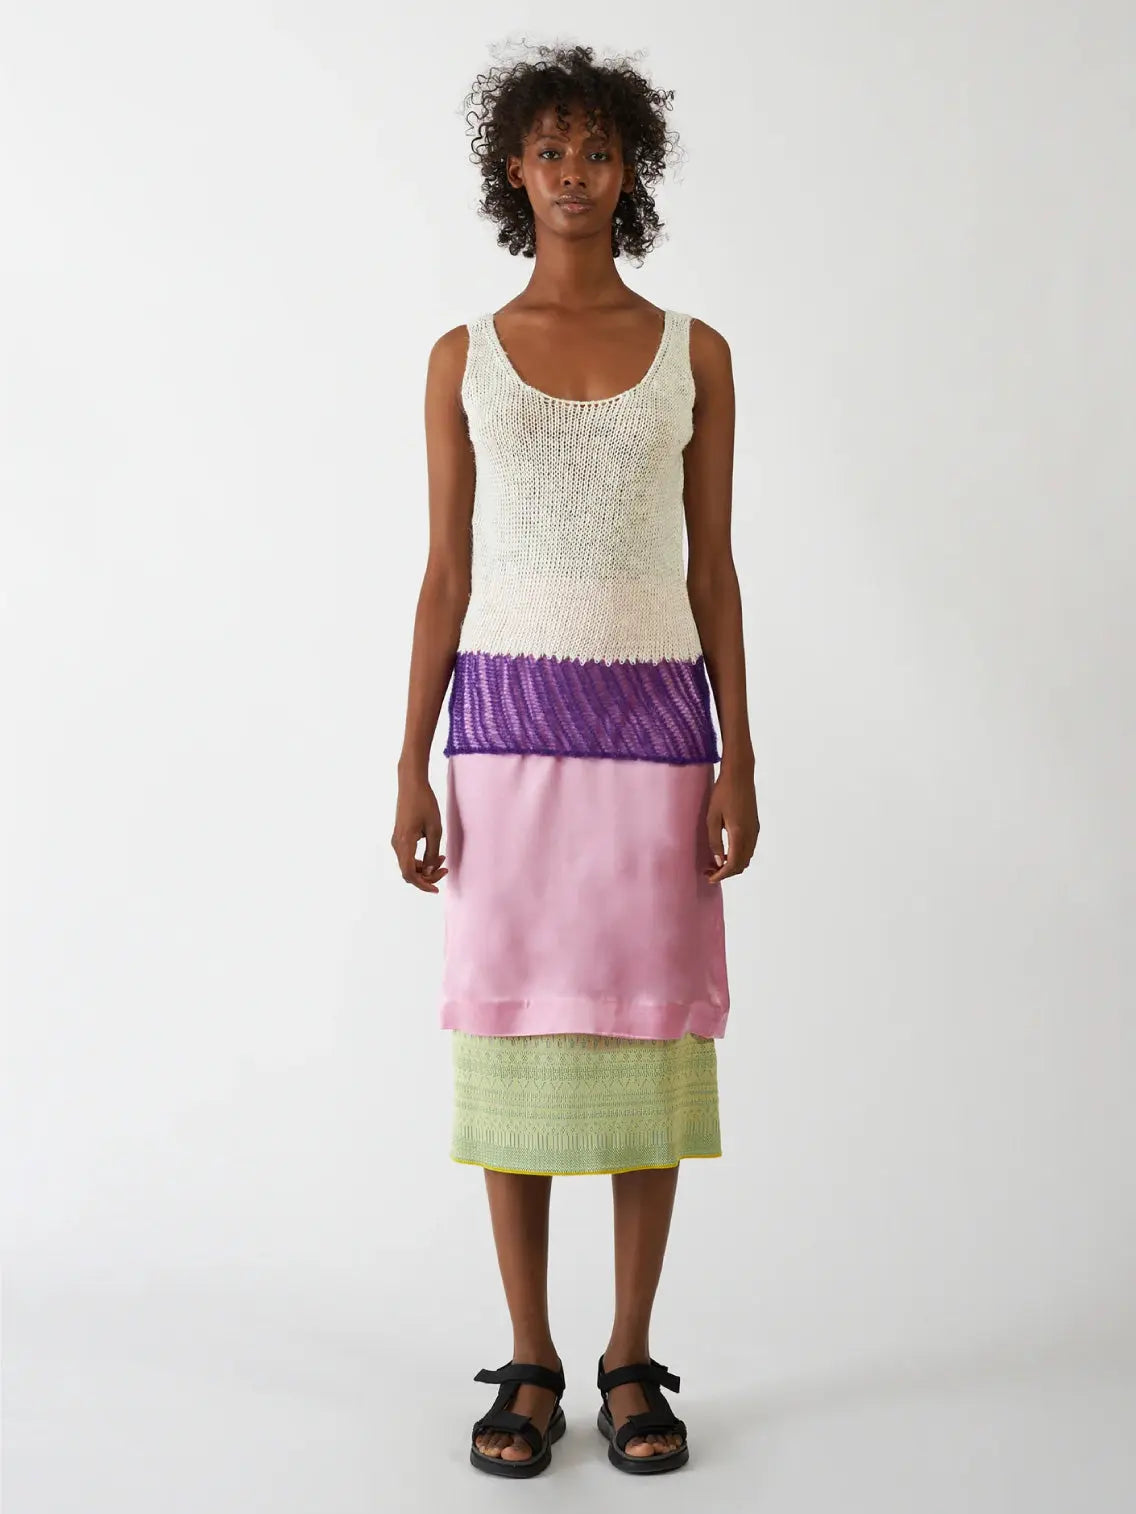 A person with curly hair is wearing a sleeveless, scoop-neck, off-white knit top with a purple ruffle at the bottom. They also have on a light pink satin skirt and are posing against a plain white background, showcasing chic fashion available at bassalstore in Barcelona. The featured top is the Flin Top Purple by Bielo.